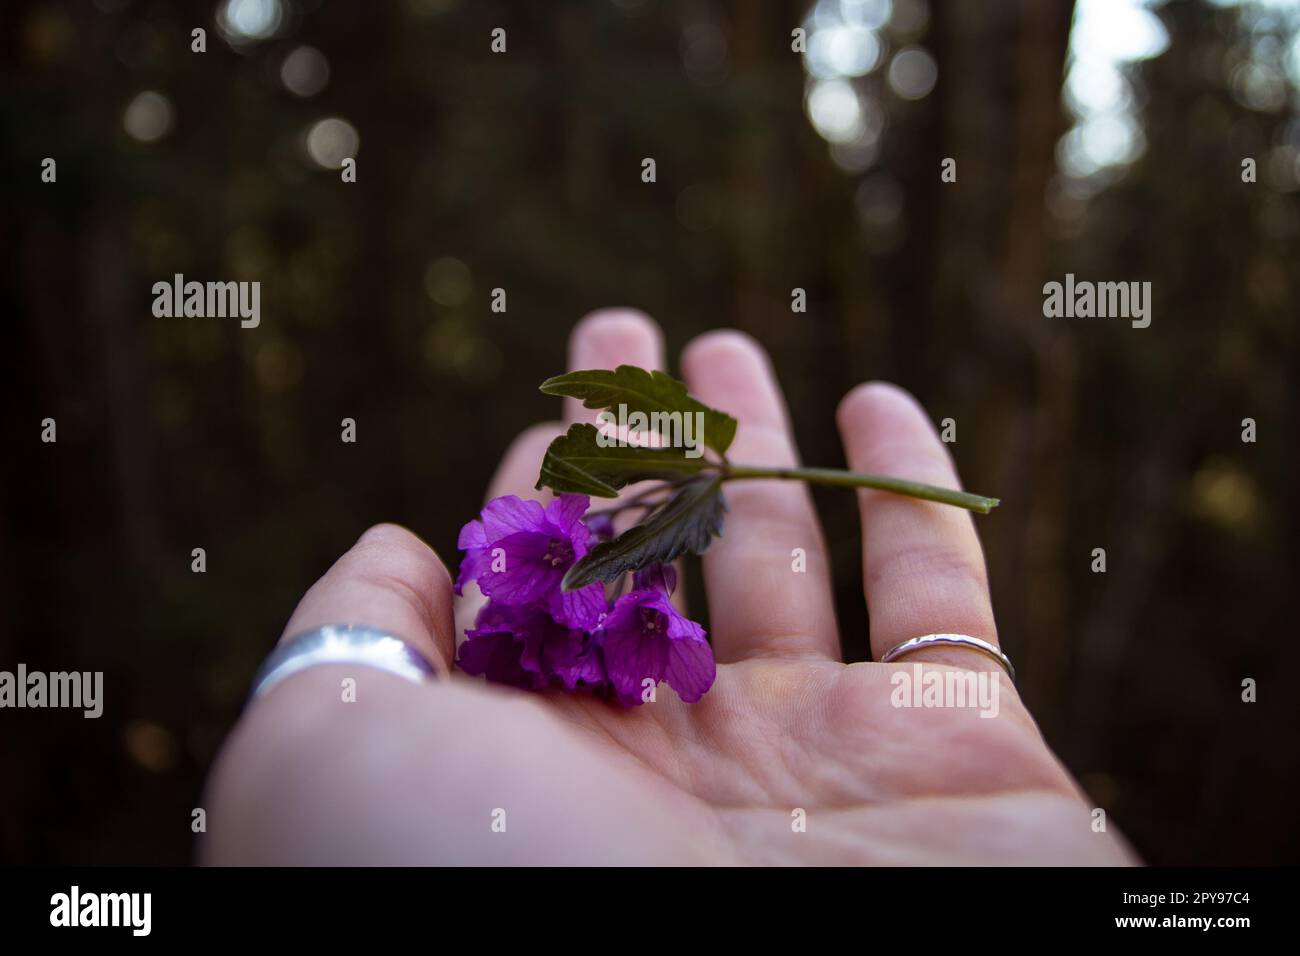 Close up violet ruellia flowers laying on female palm concept photo Stock Photo